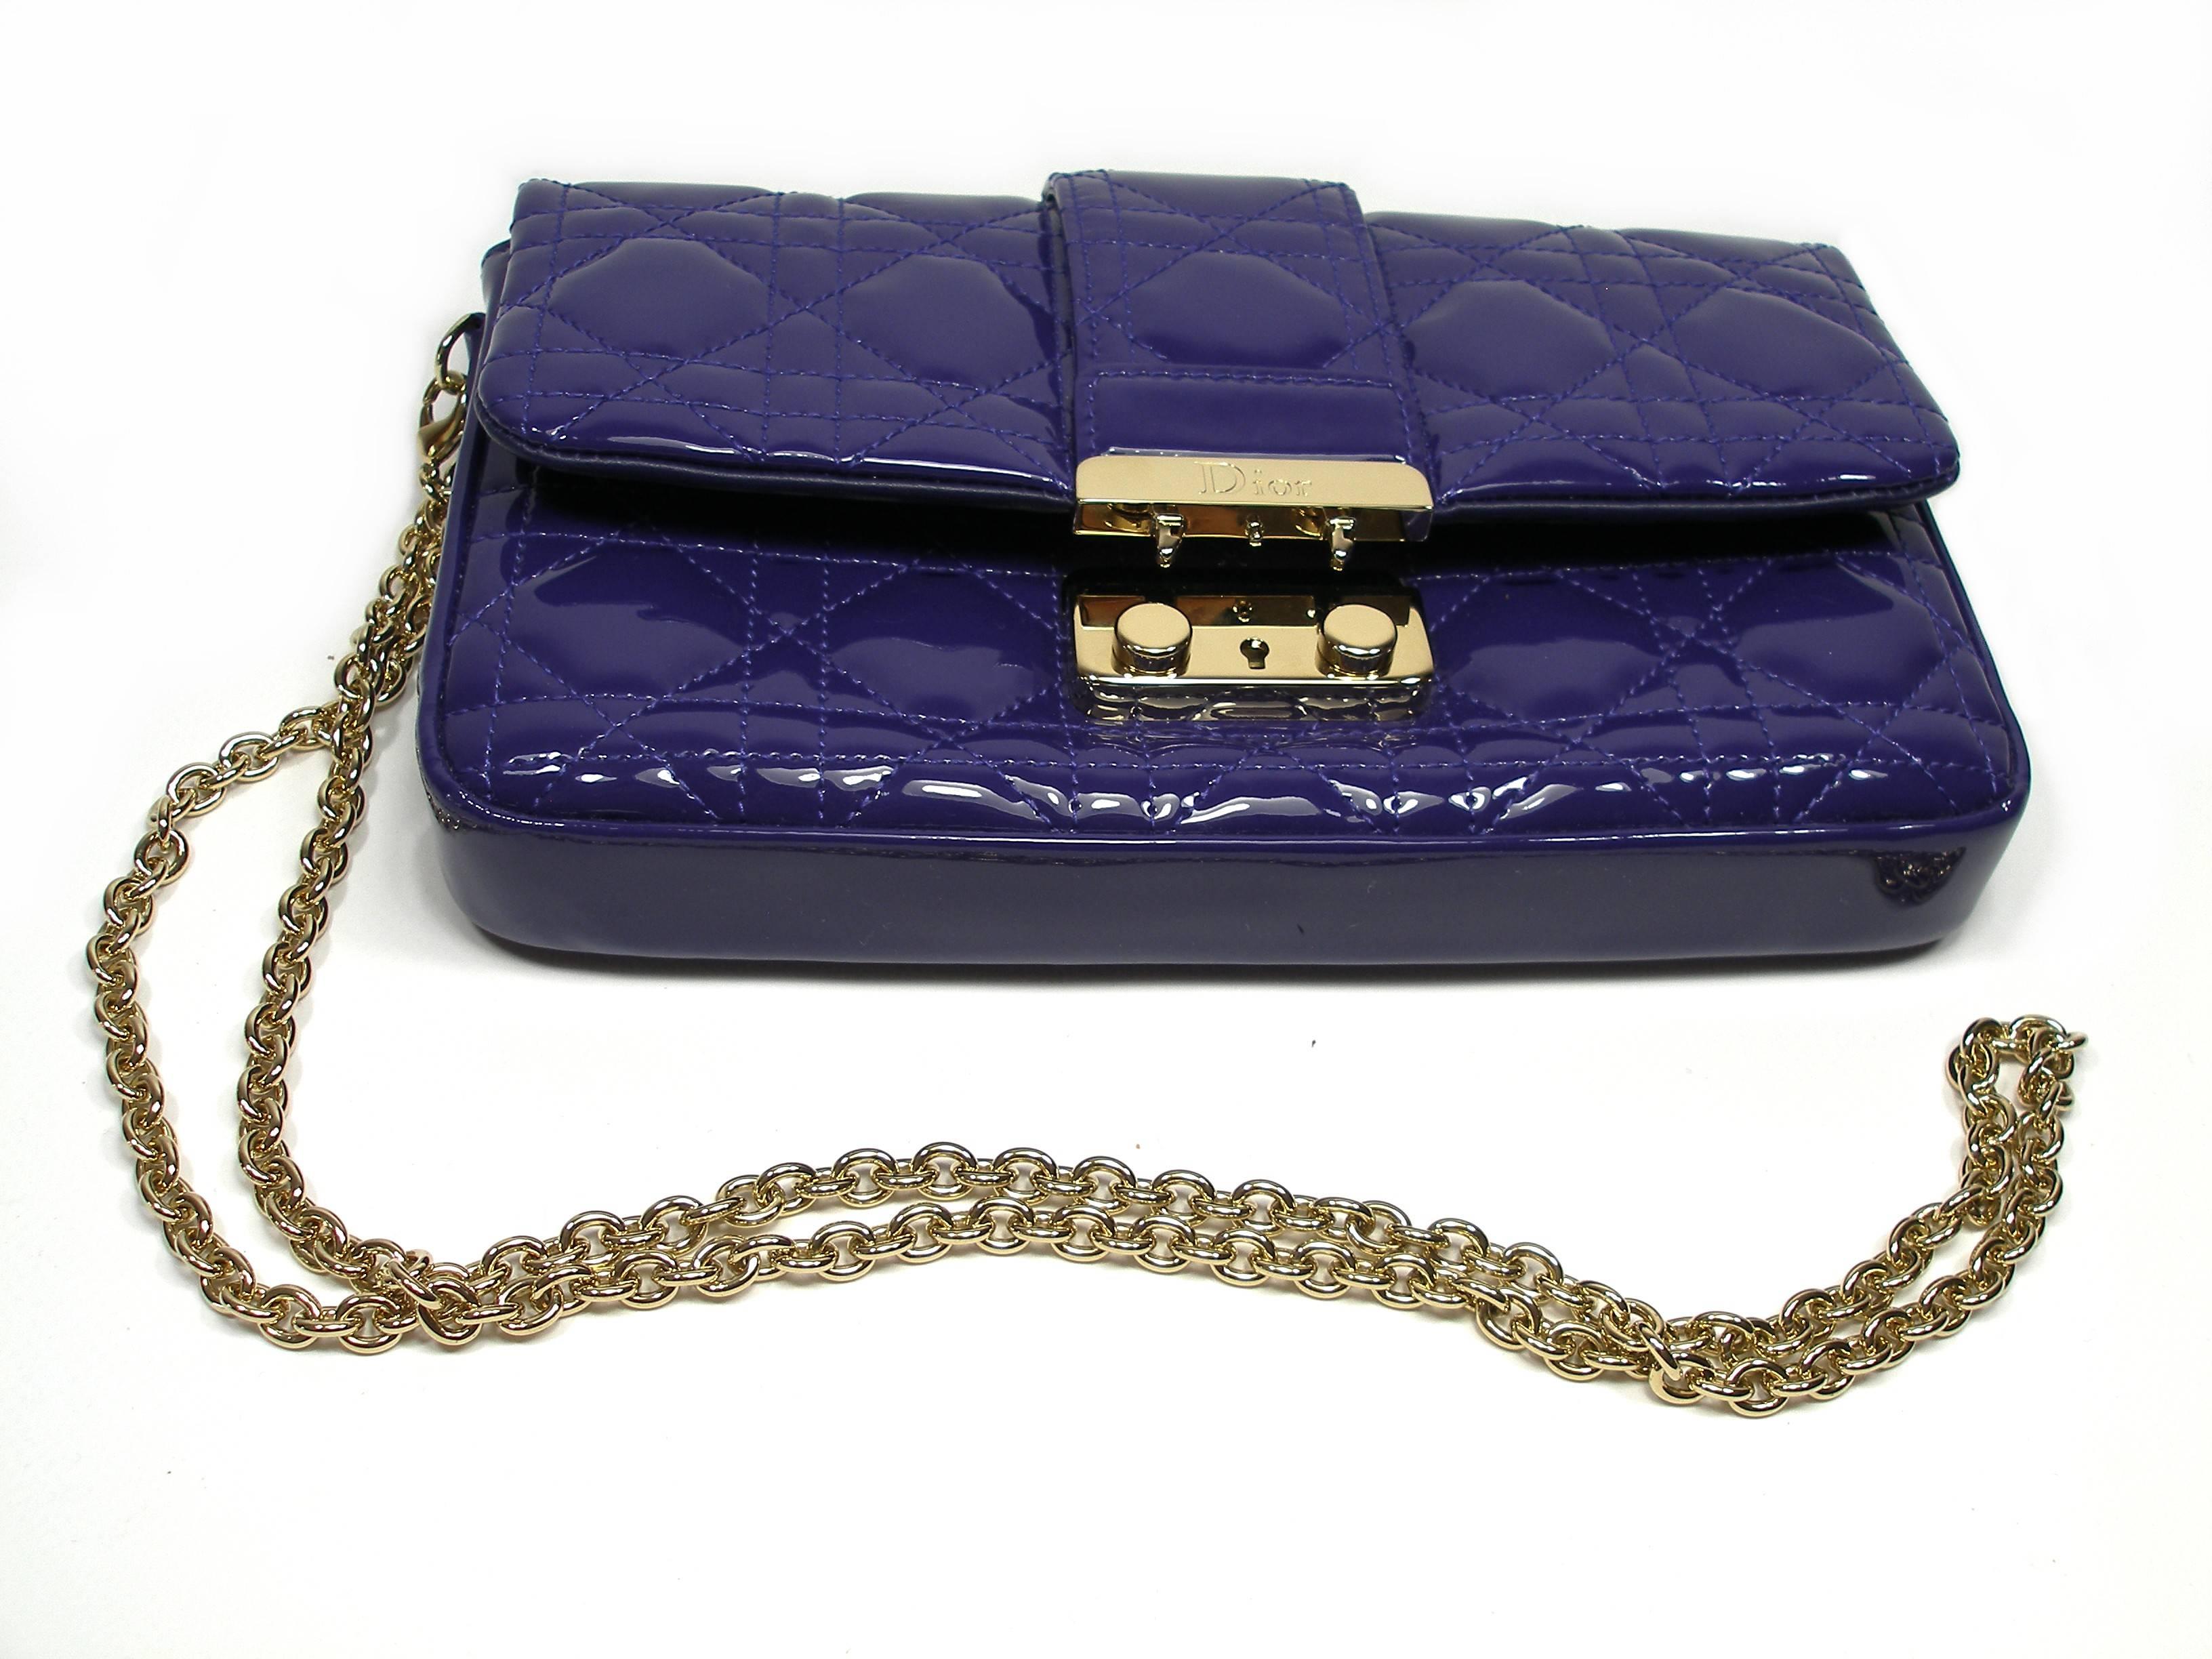 DIOR NEW LOCK Pouch in Violet patent leather and gold Hadware / BRAND NEW  4